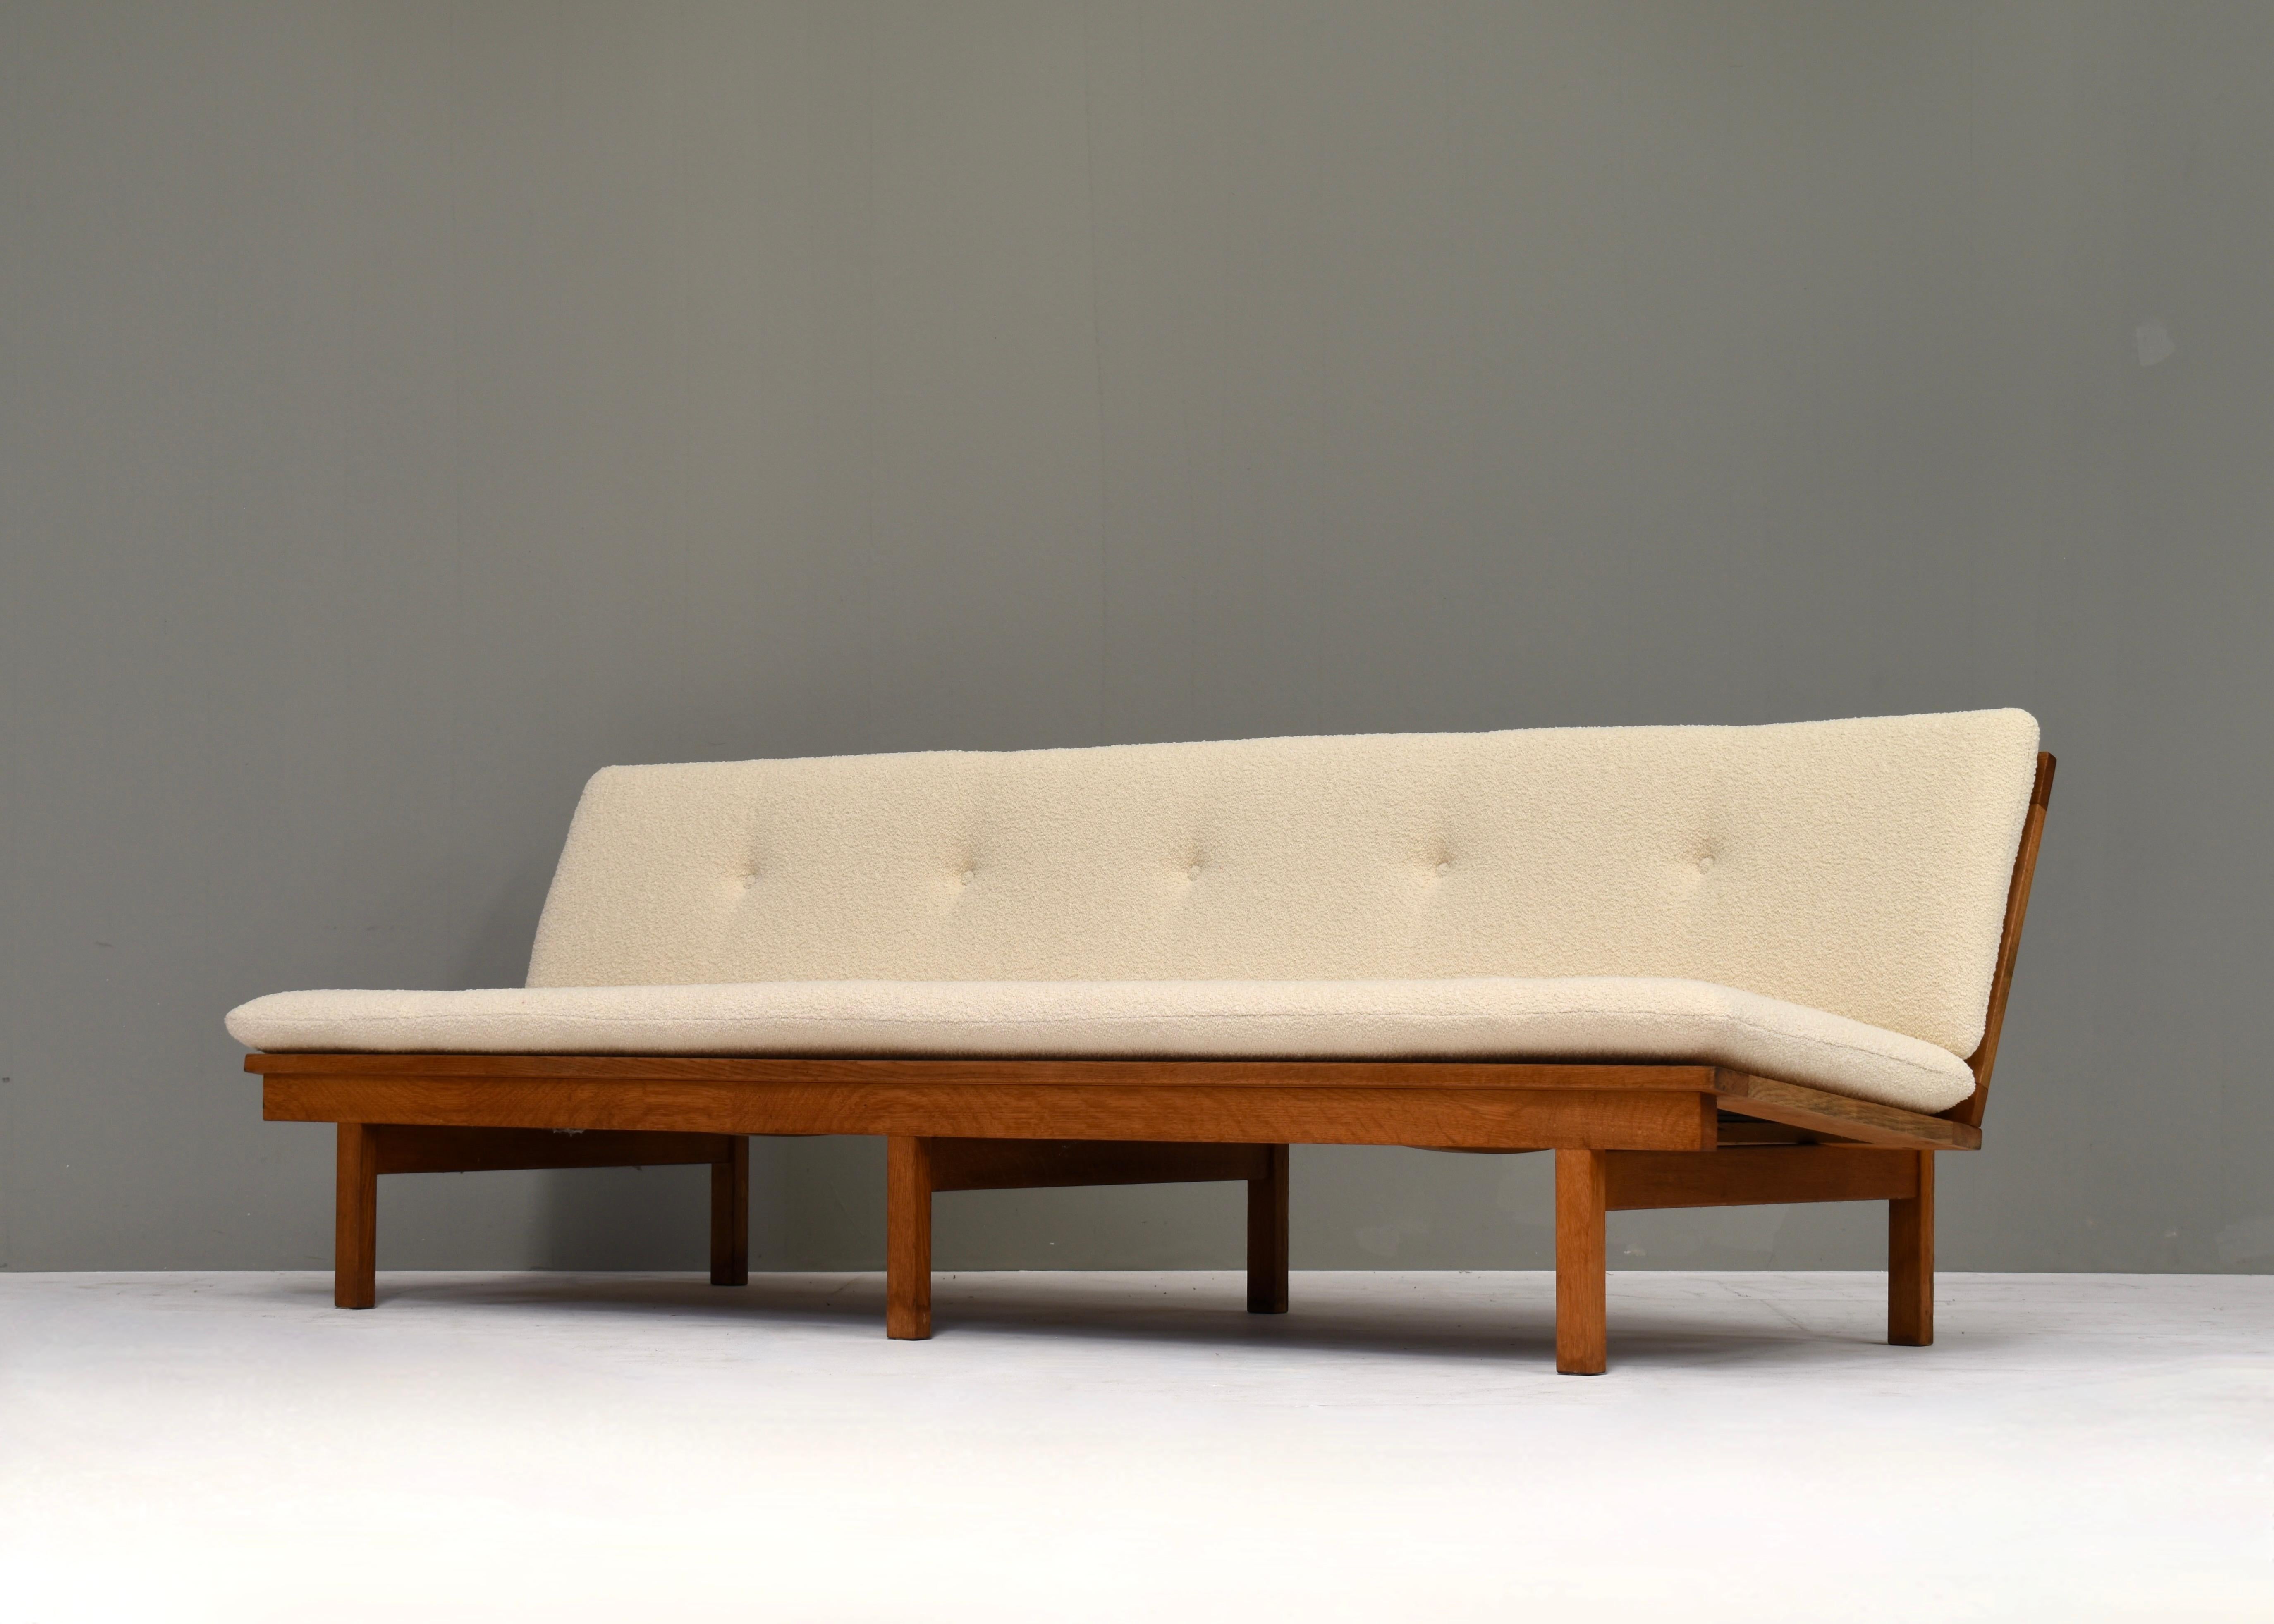 Børge Mogensen sofa in solid oak and new bouclé fabric - Denmark, circa 1950.
New upholstery and foam filling.
Beautiful boucle fabric from Paris, France.

Designer: Børge Mogensen
Manufacturer: Fredericia
Country: Denmark
Model: 2219 4-seat bench